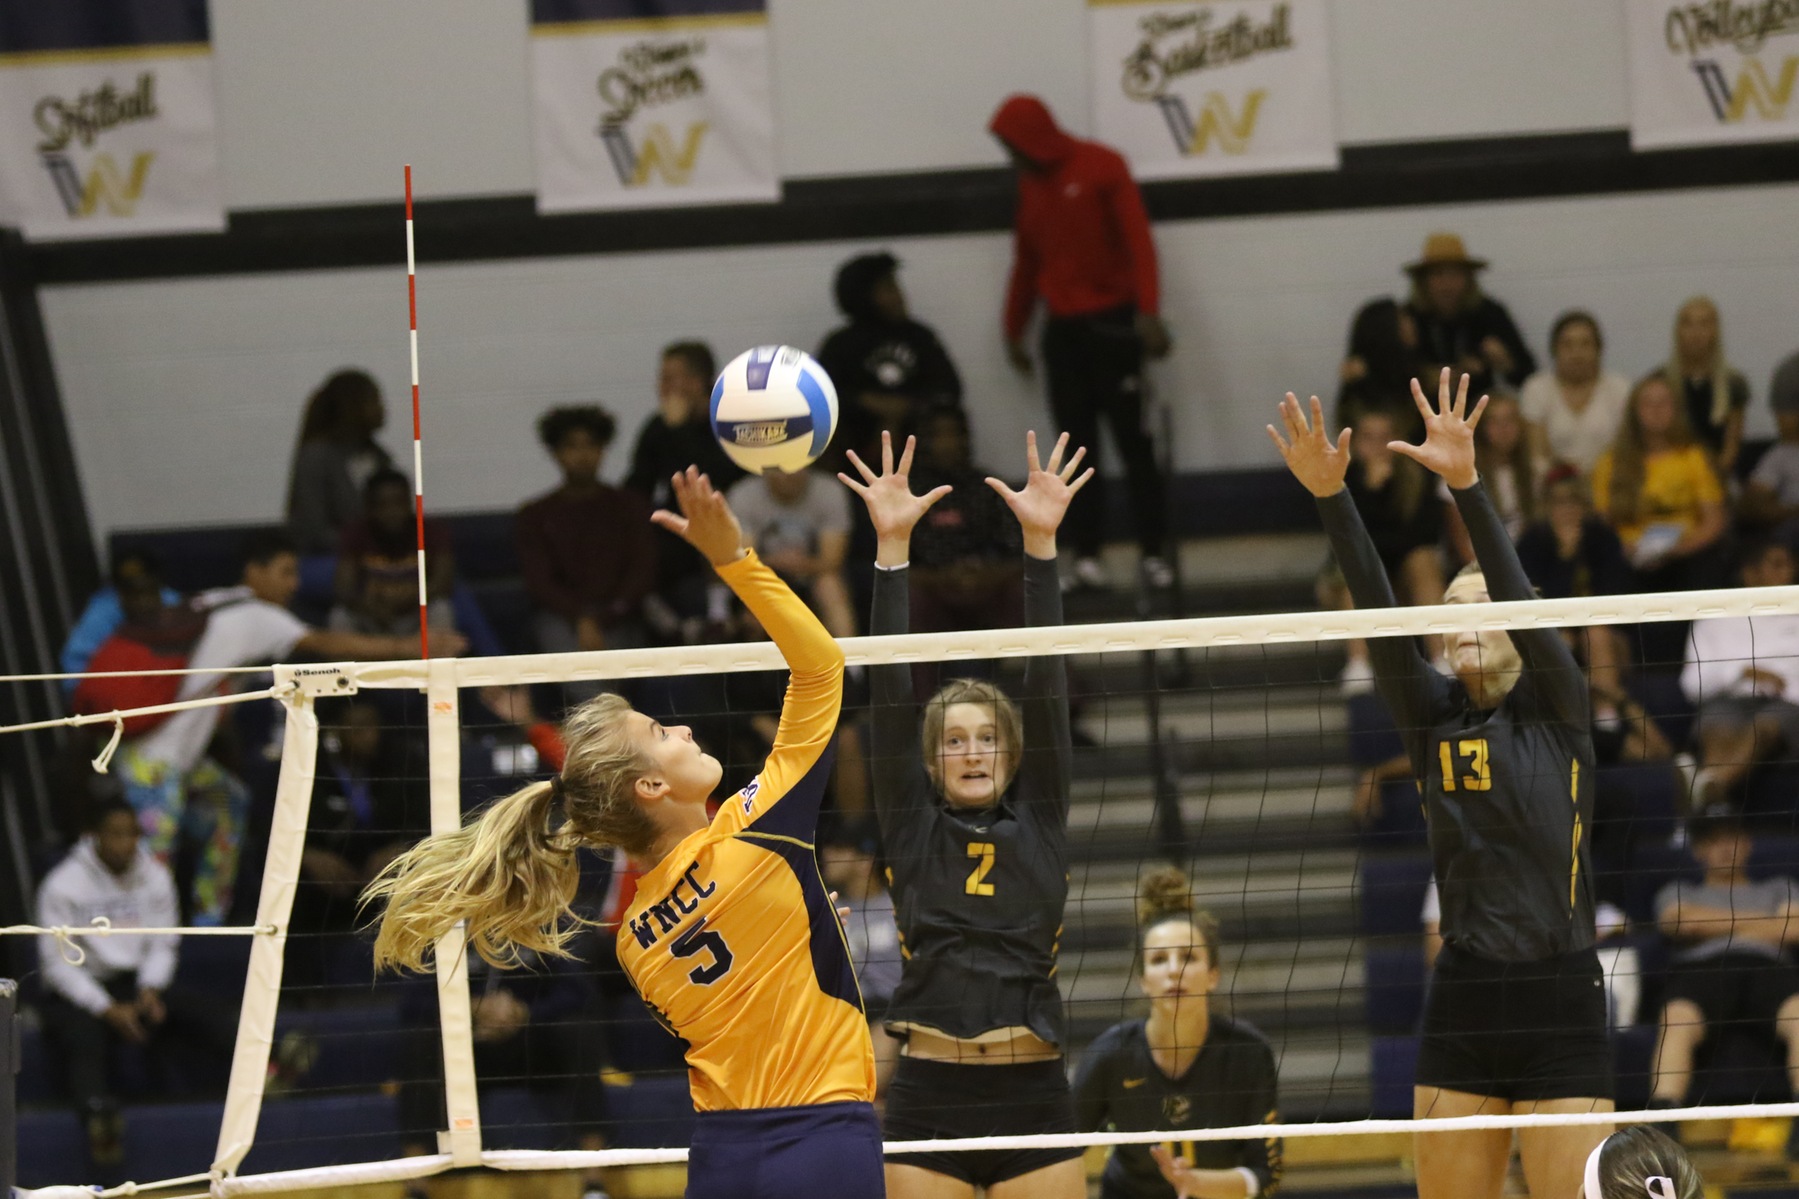 Beining pounds down 16 kills, leads Cougars to win over EWC